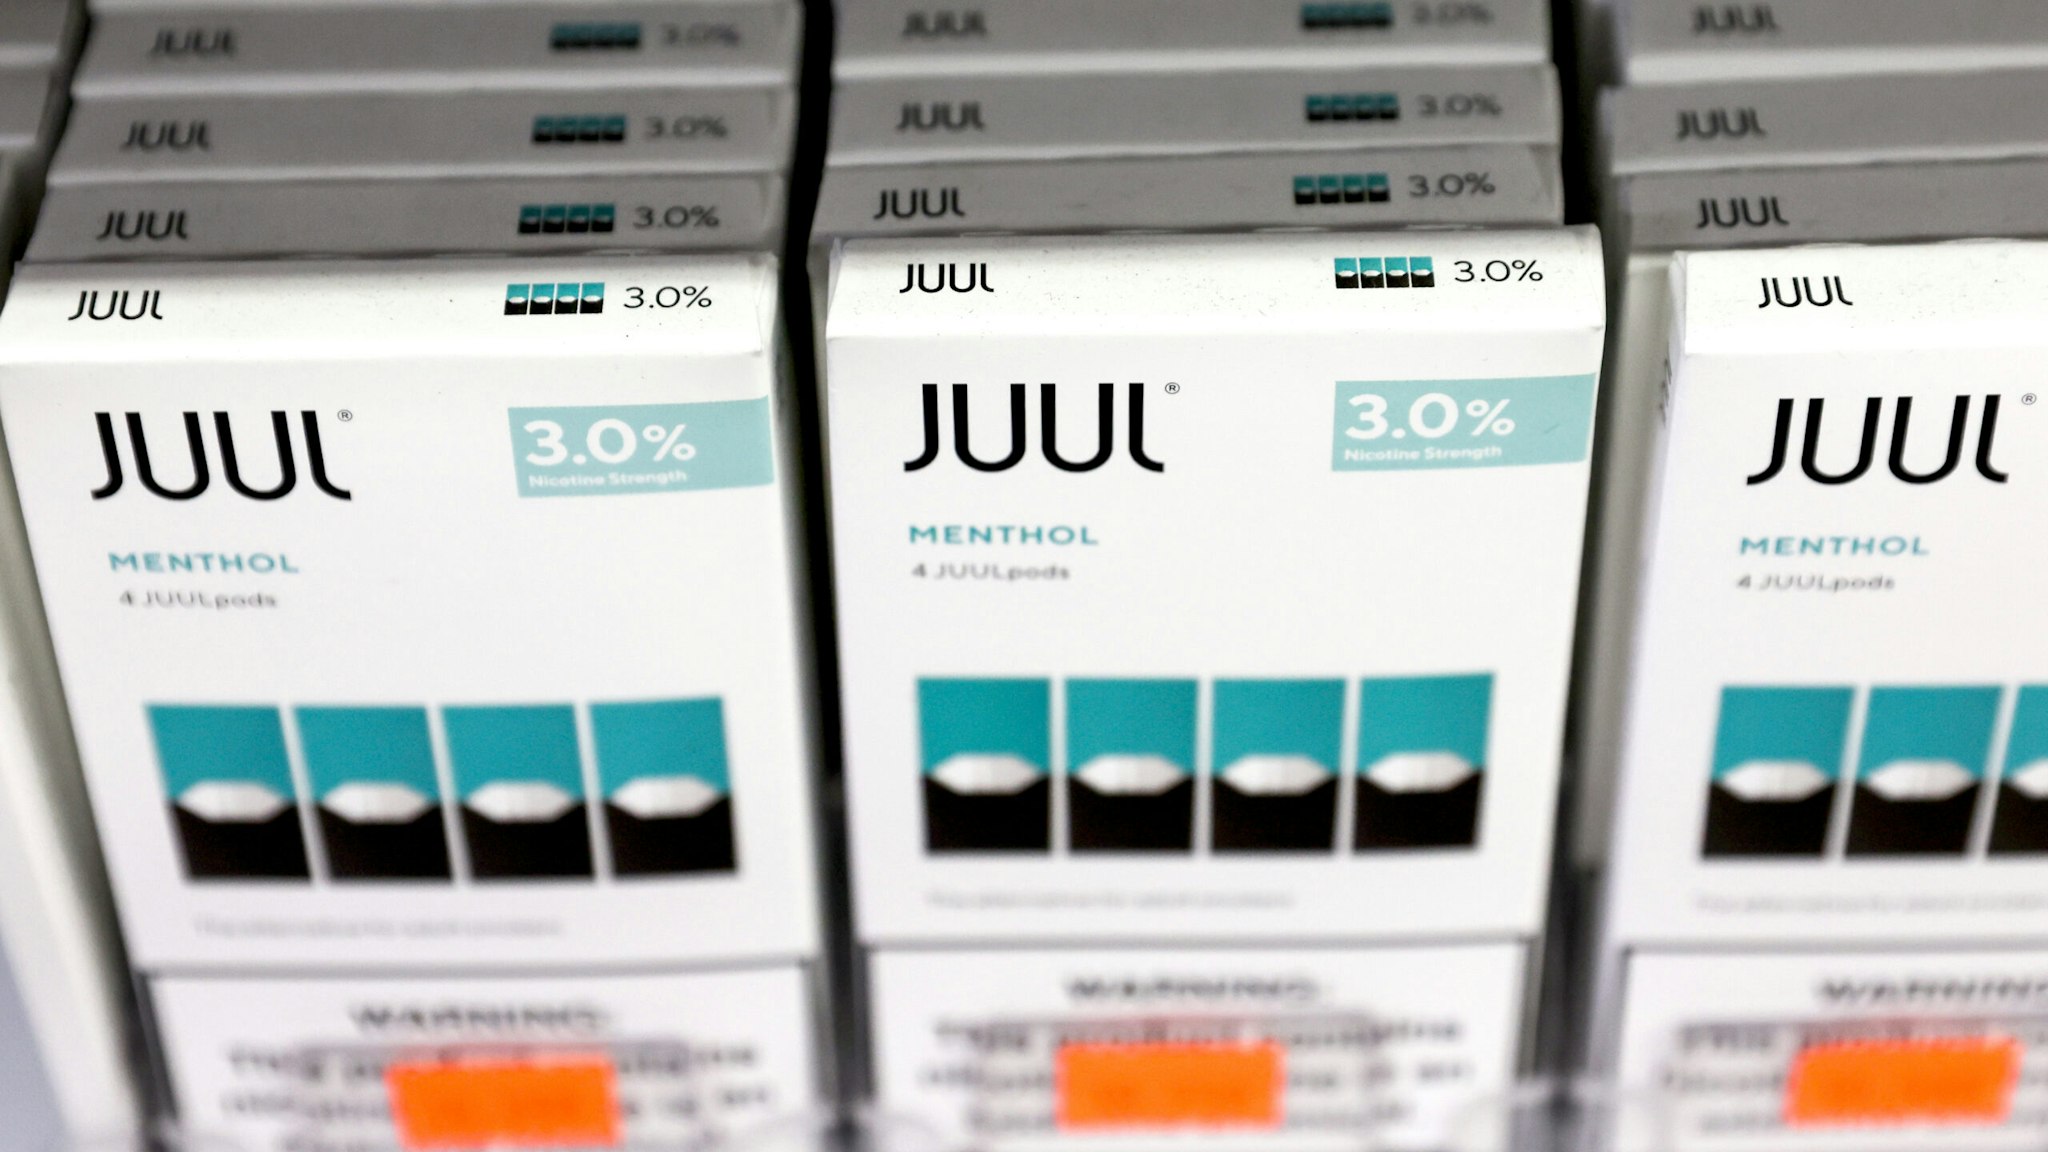 LOS ANGELES, CALIFORNIA - JUNE 22: Packages of Juul e-cigarettes are displayed for sale in the Brazil Outlet shop on June 22, 2022 in Los Angeles, California. The Food and Drug Administration (FDA) is reportedly preparing to order Juul Labs Inc. to remove its e-cigarette products from the U.S. market.